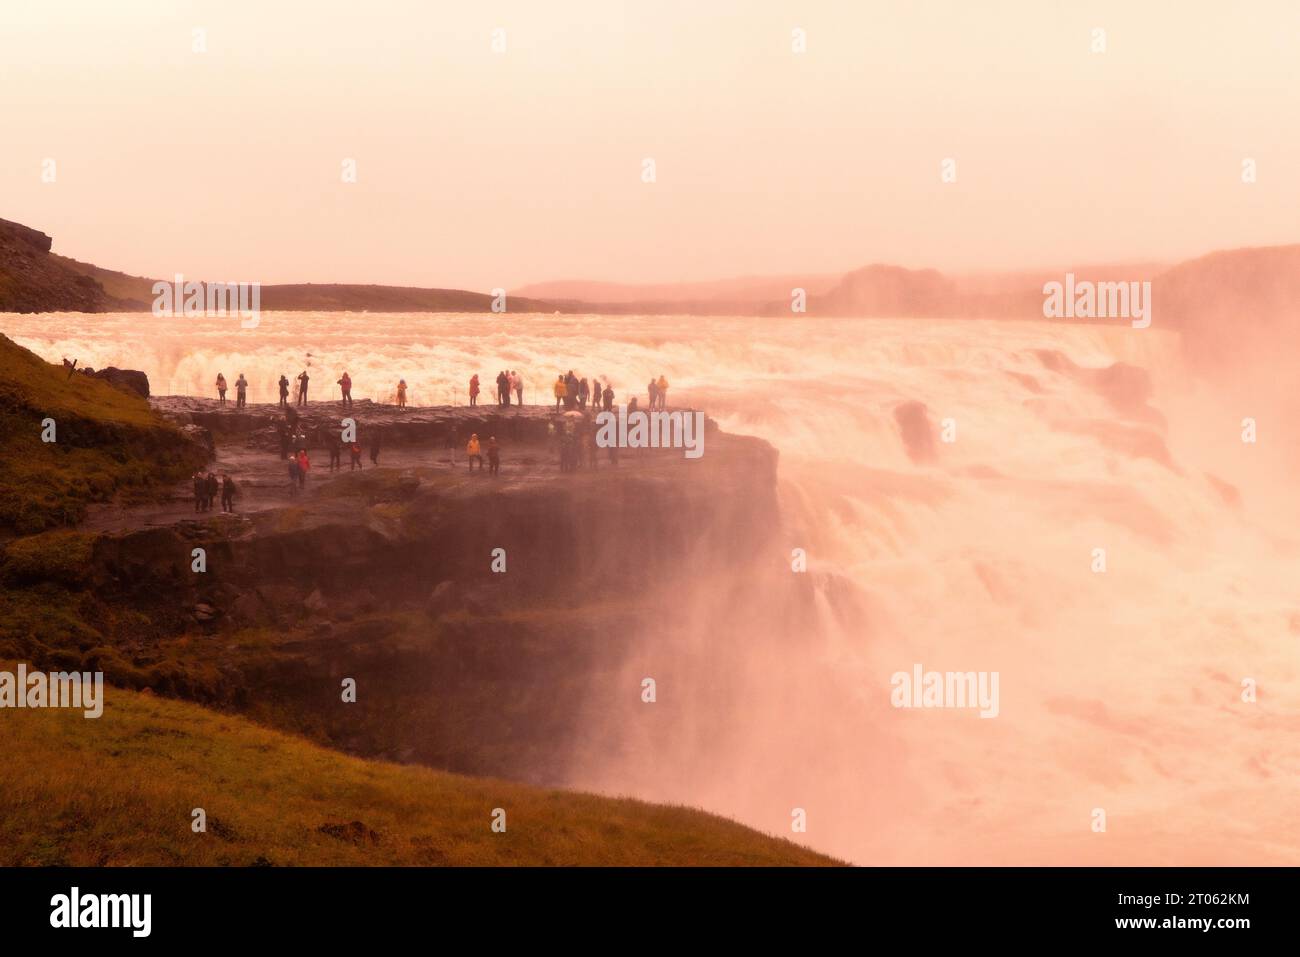 Iceland tourism; Tourists at Gullfoss Waterfall Iceland, a large, famous waterfall on the Golden Circle tour, Reykjavik, Iceland Europe Stock Photo